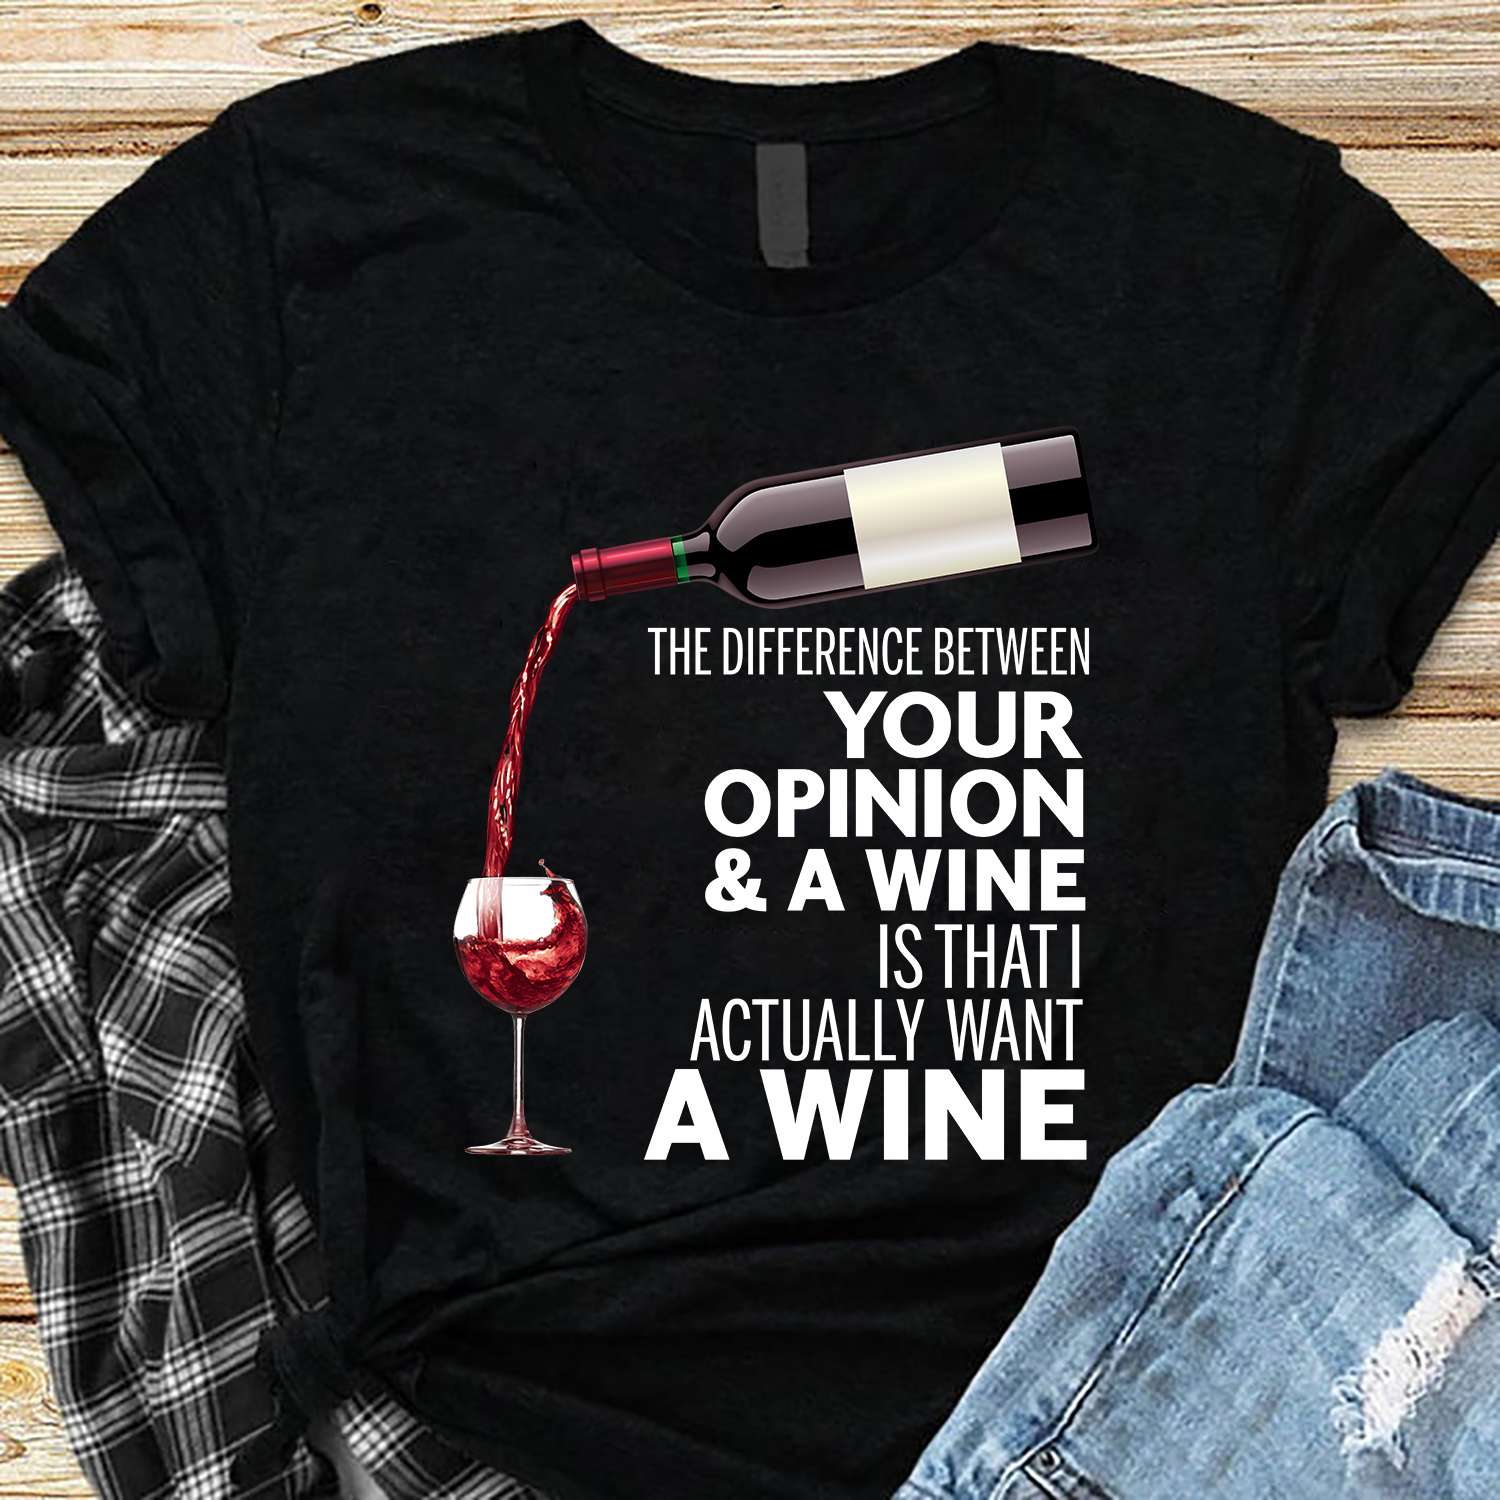 The difference between your opinion and a wine is that I actually want a wine - Wine lover